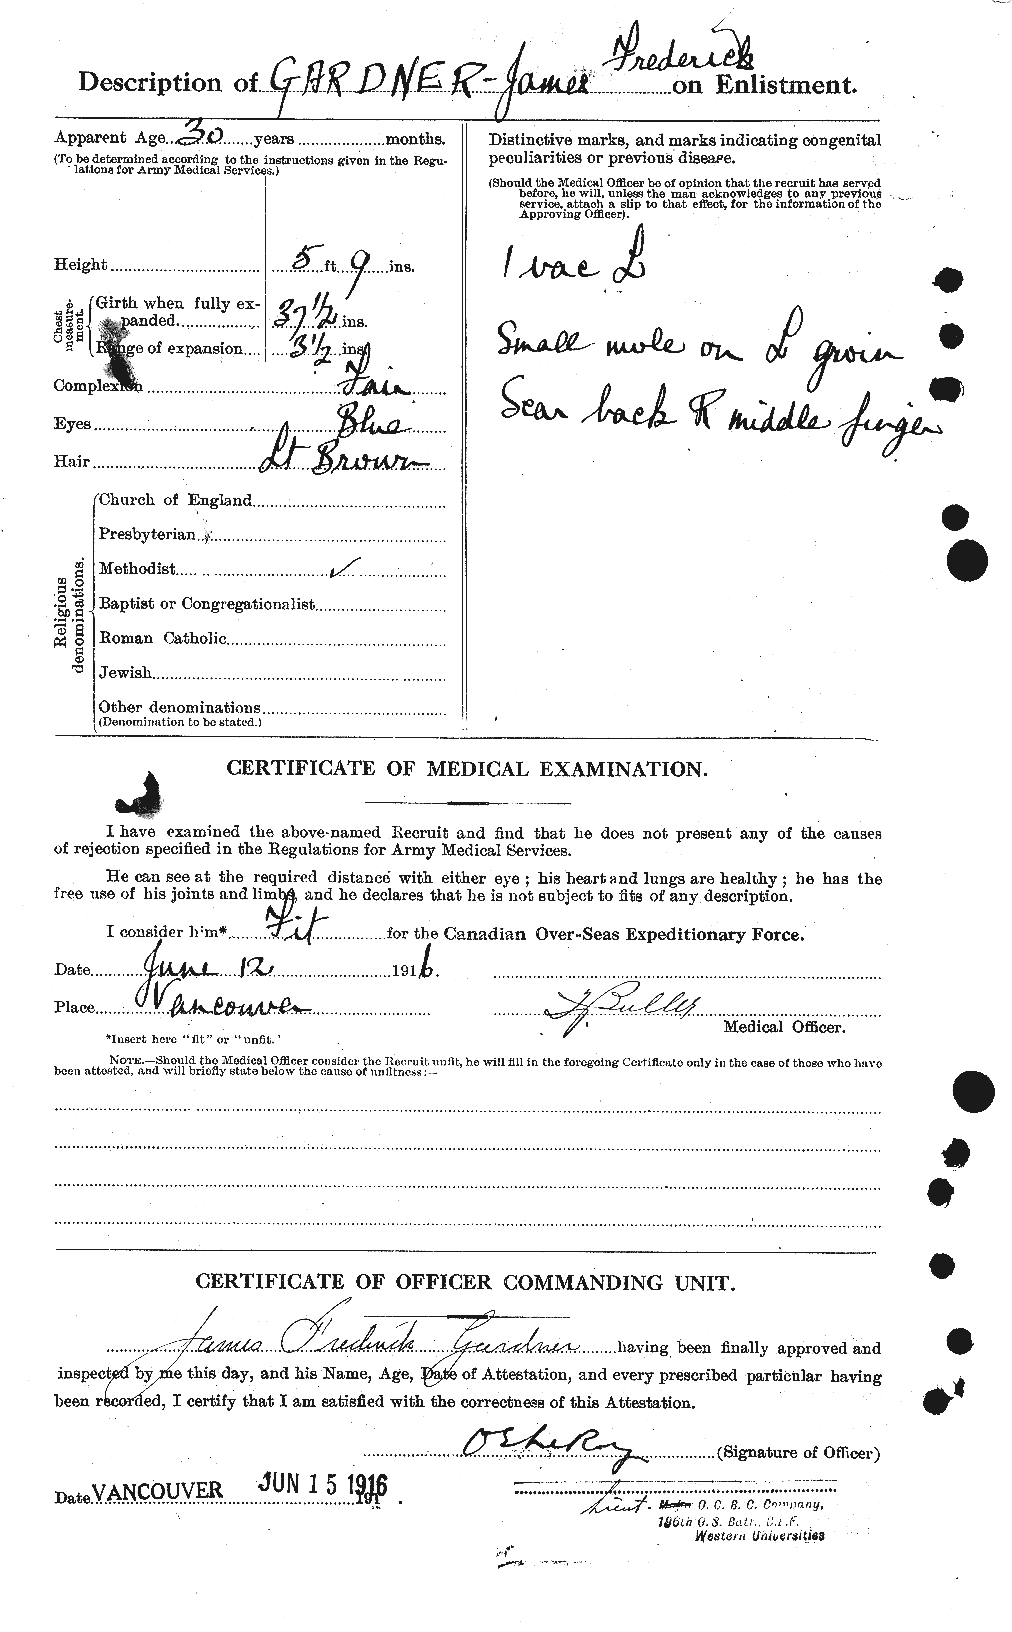 Personnel Records of the First World War - CEF 342432b